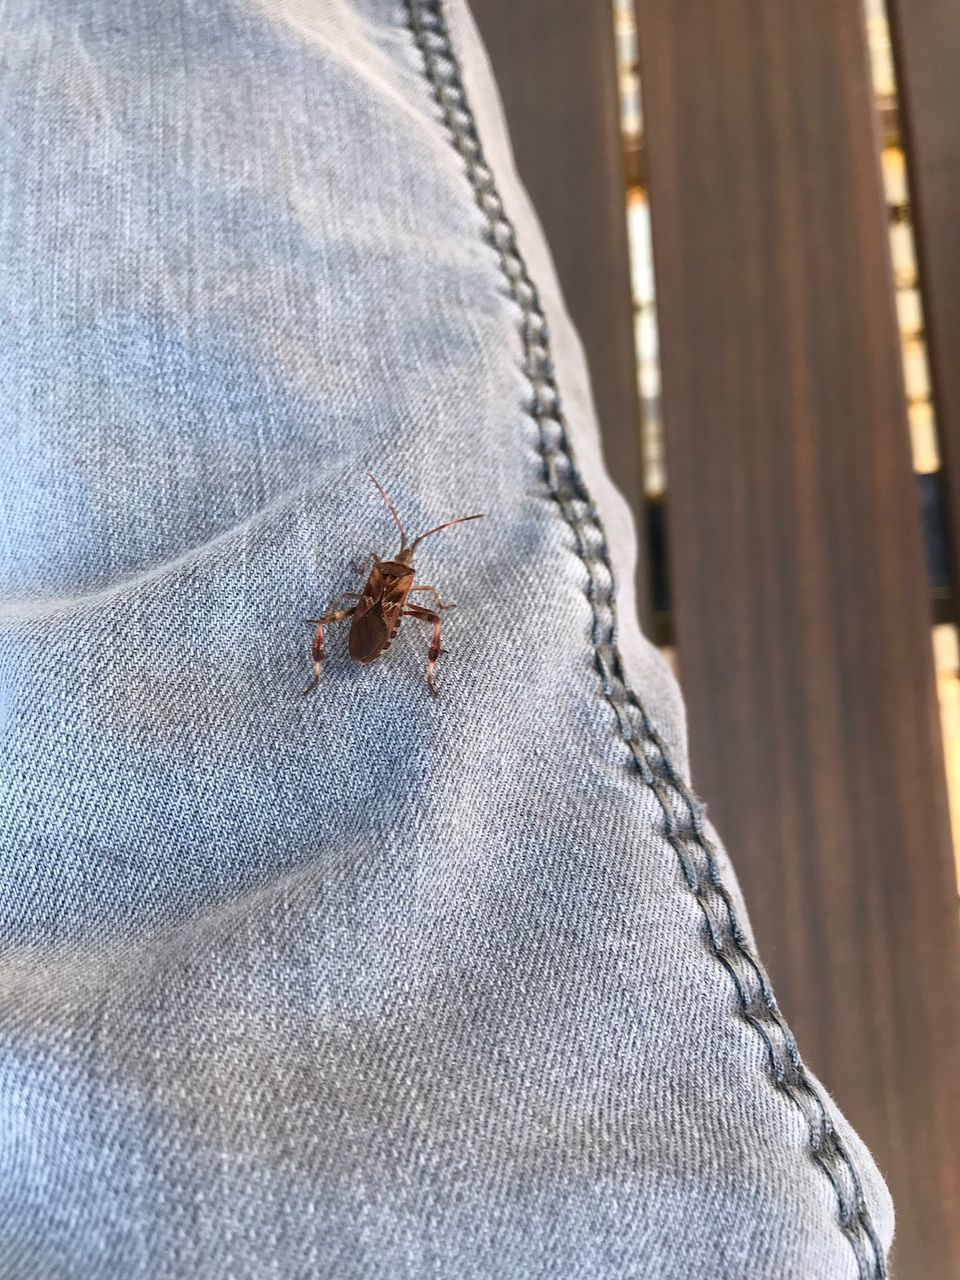 jeans, casual clothing, textile, close-up, one person, denim, human body part, one animal, human leg, invertebrate, animals in the wild, real people, animal themes, animal, unrecognizable person, animal wildlife, day, insect, lifestyles, focus on foreground, outdoors